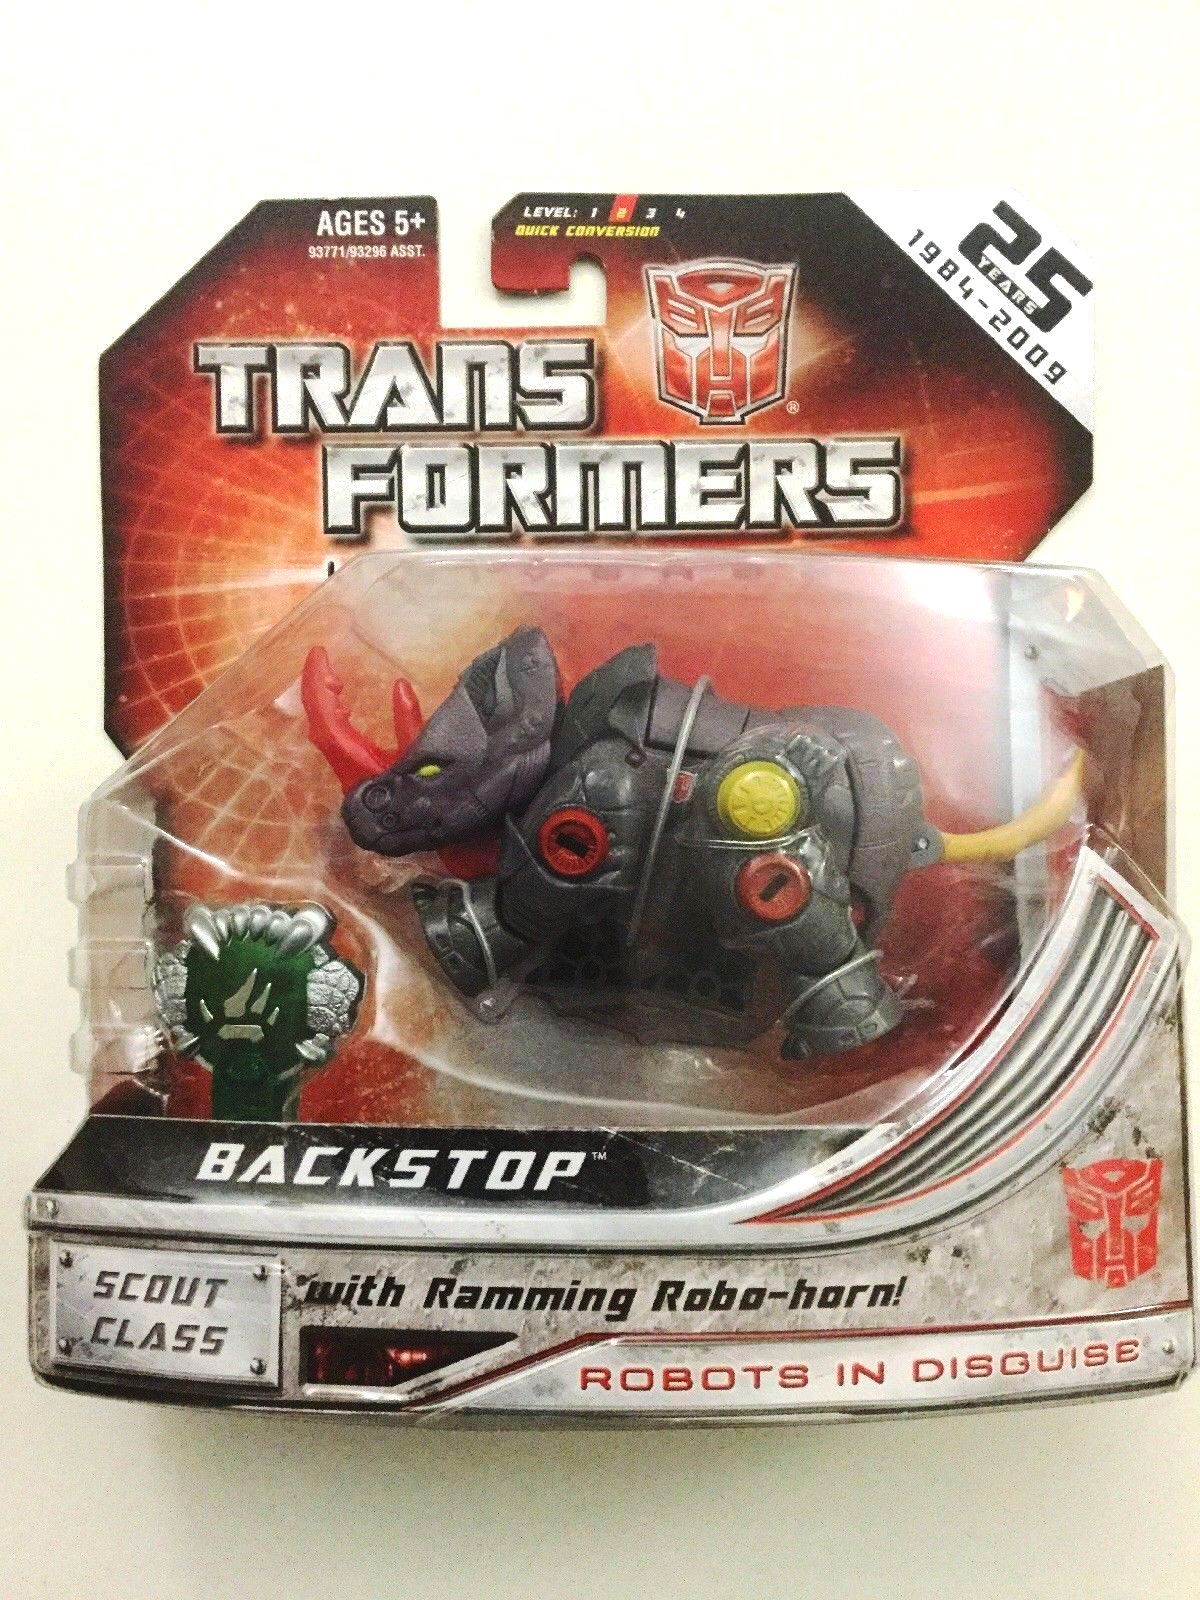 Lot 3 new Transformers Universe Backstop Brakedown Brushguard Robots in Disguise 